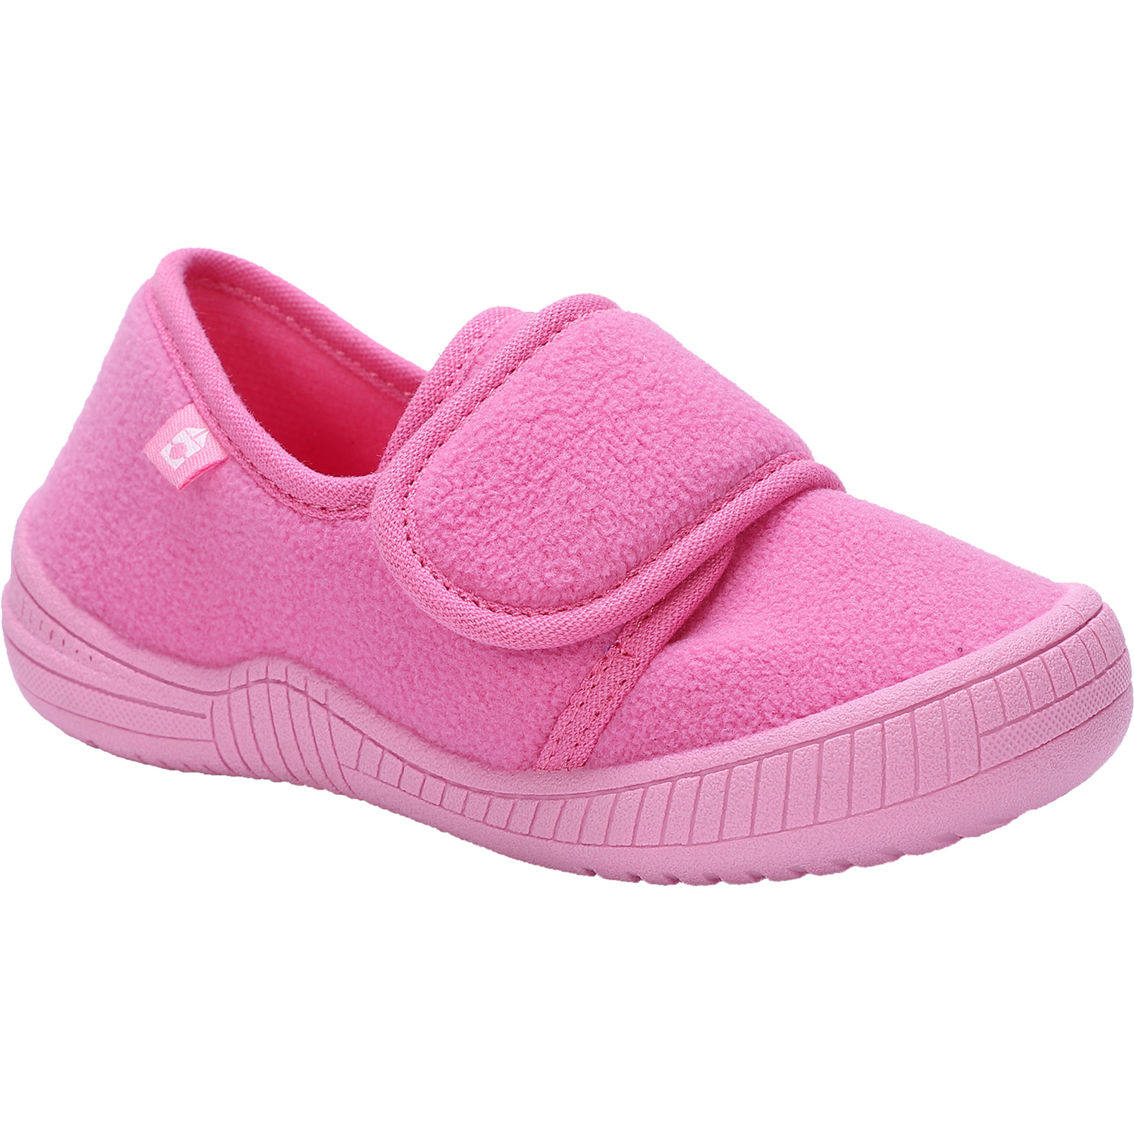 Oomphies Toddler Girls Koko Slippers | Slippers | Shoes | Shop The Exchange